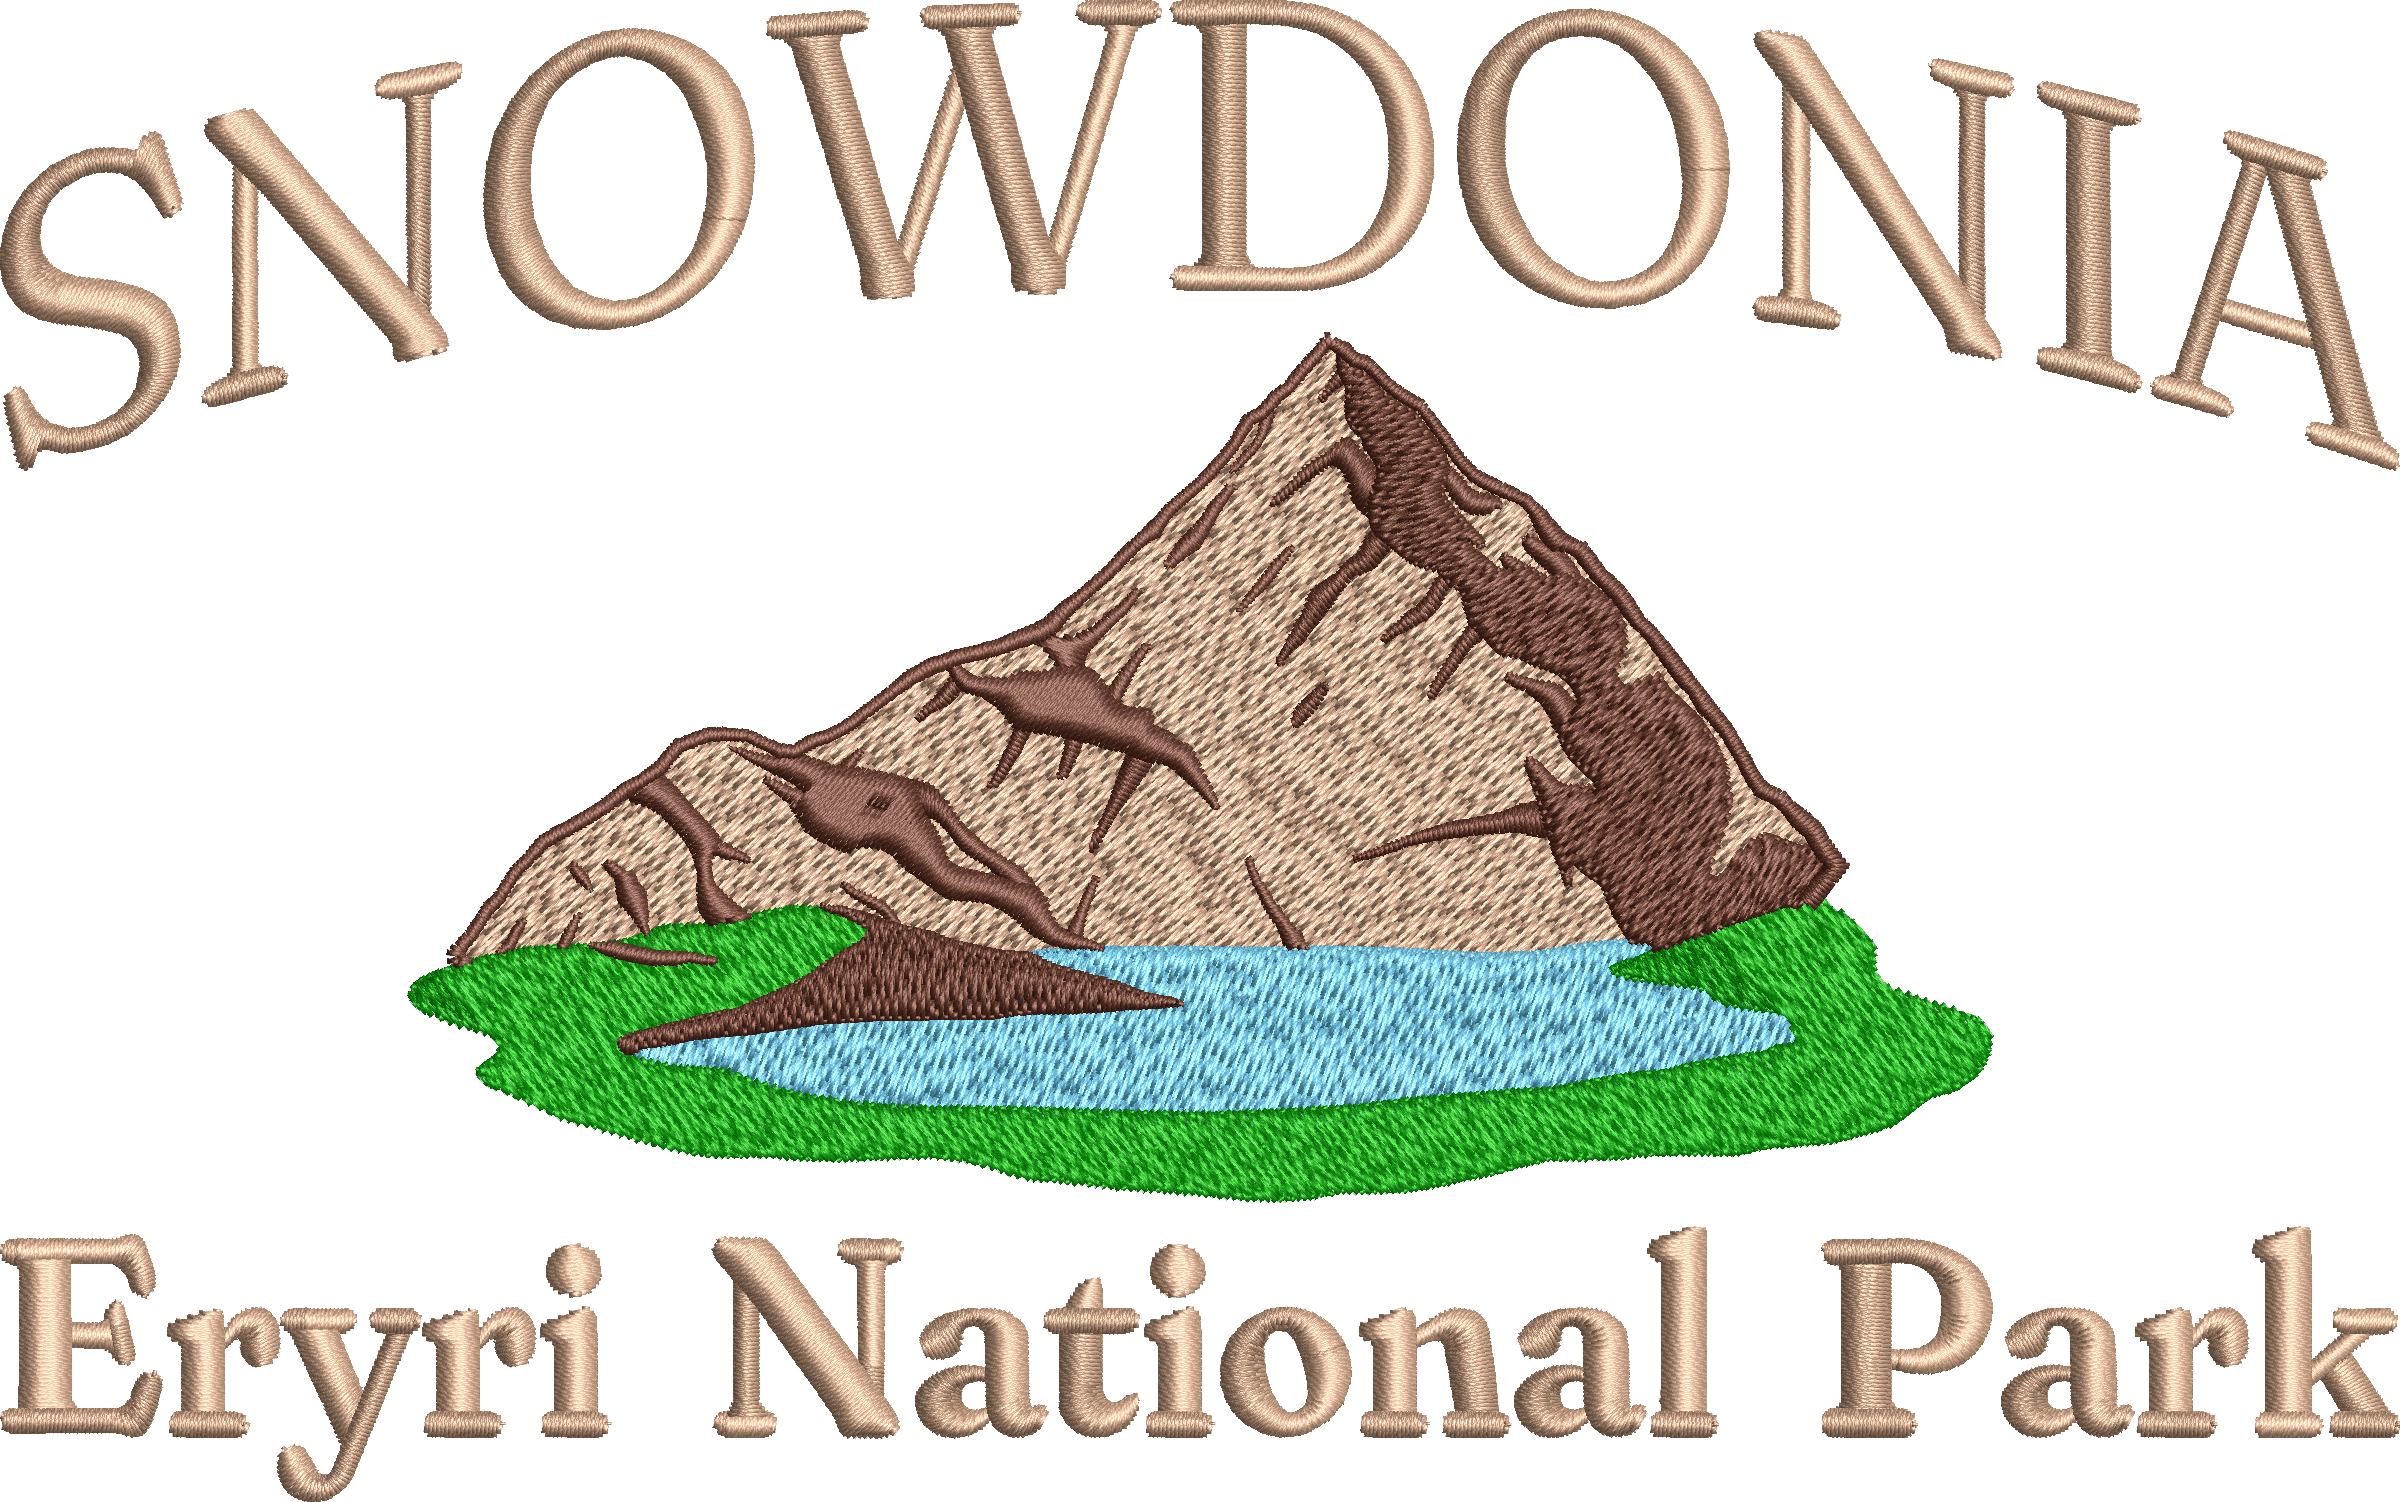 Cities and Countries-Inspired Snowdonia national park Embroidery Design File main image - This Cities and Countries embroidery designs files featuring Snowdonia national park from Cities and Countries. Digital download in DST & PES formats. High-quality machine embroidery patterns by EmbroPlex.